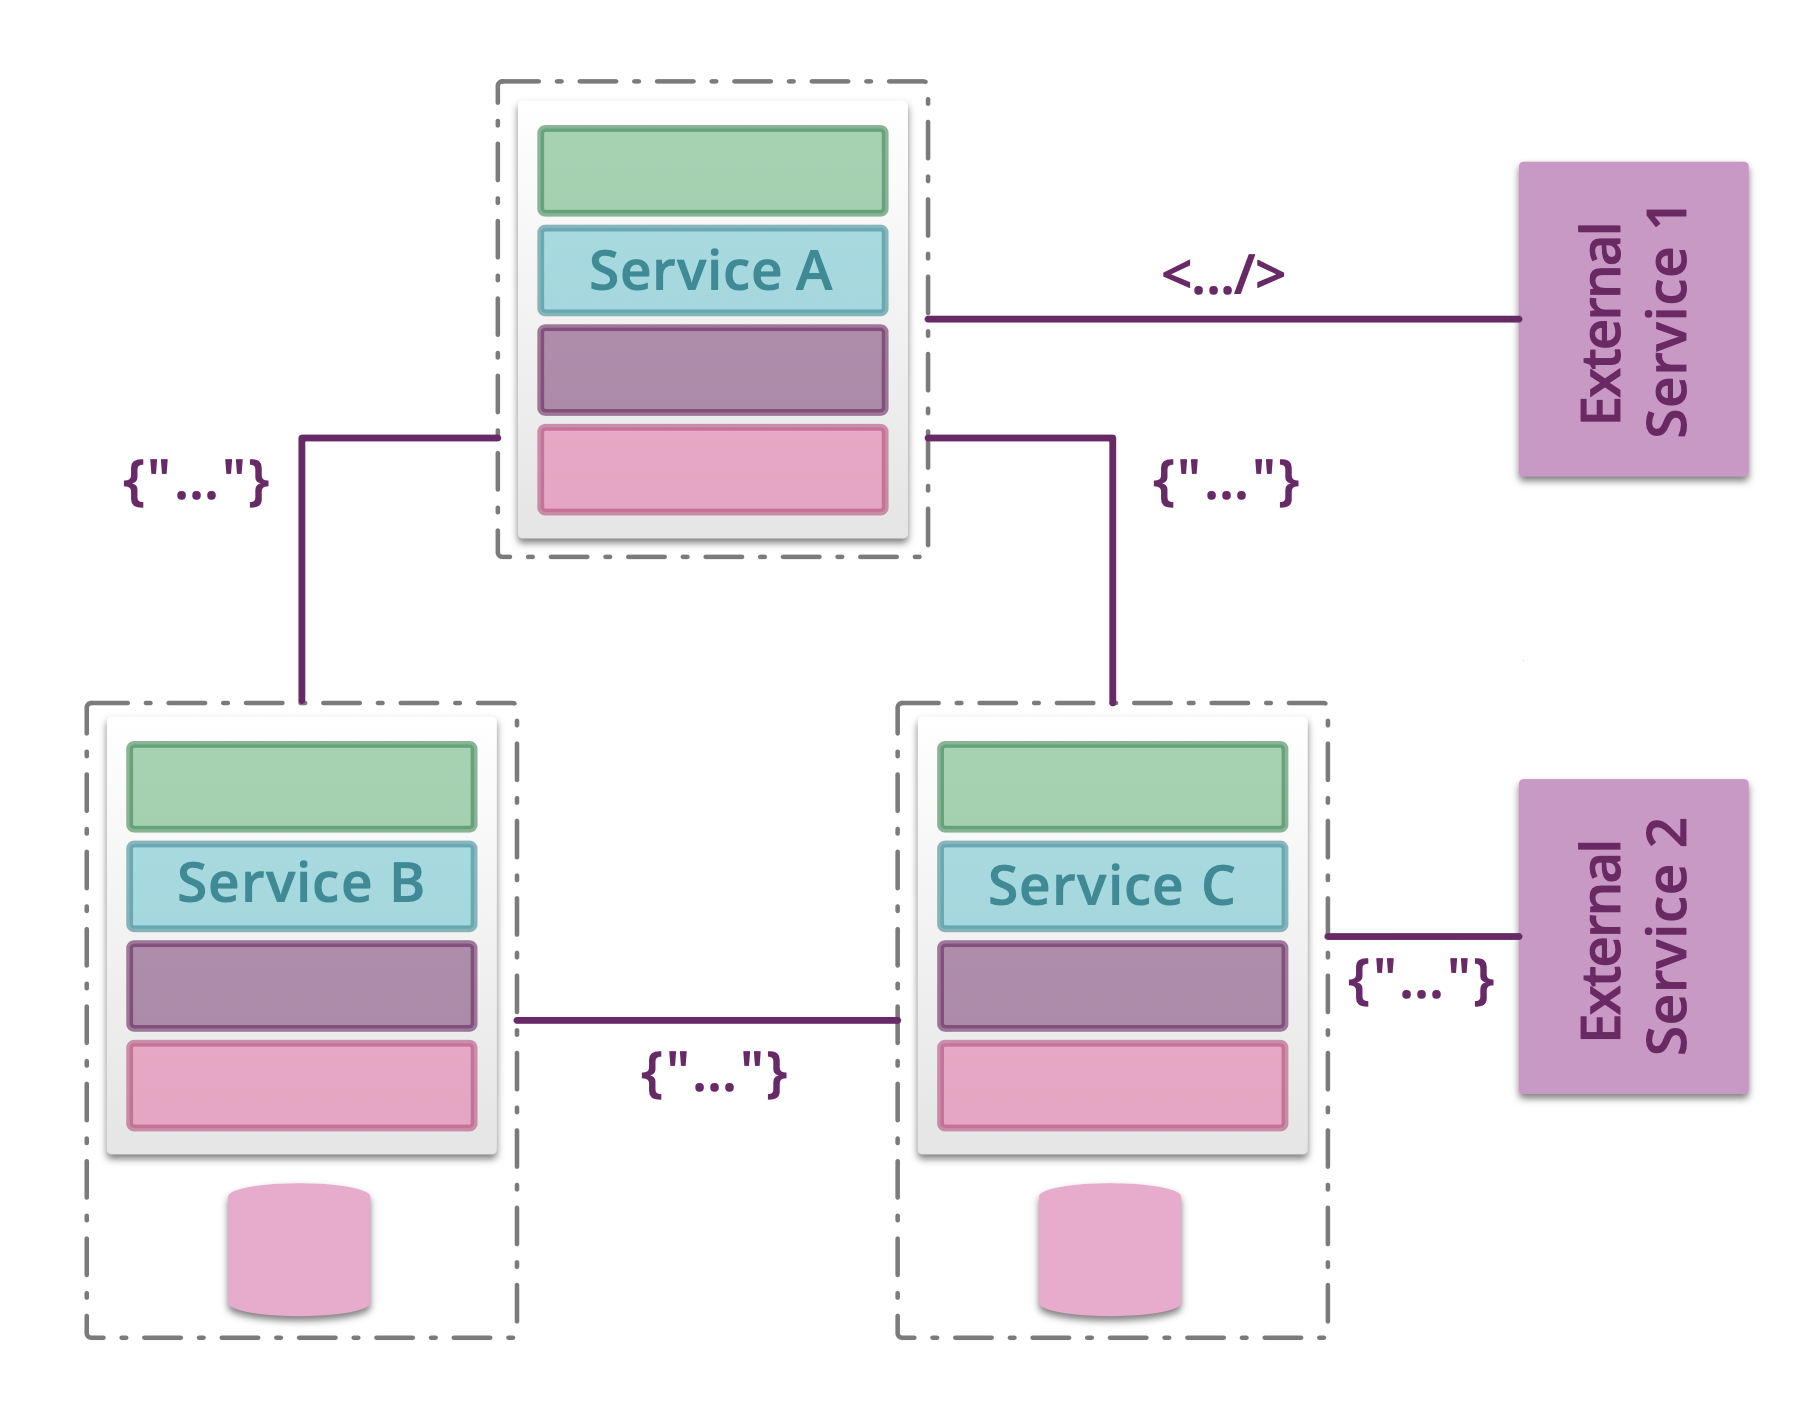 ../../_images/testing-microservices-03.png